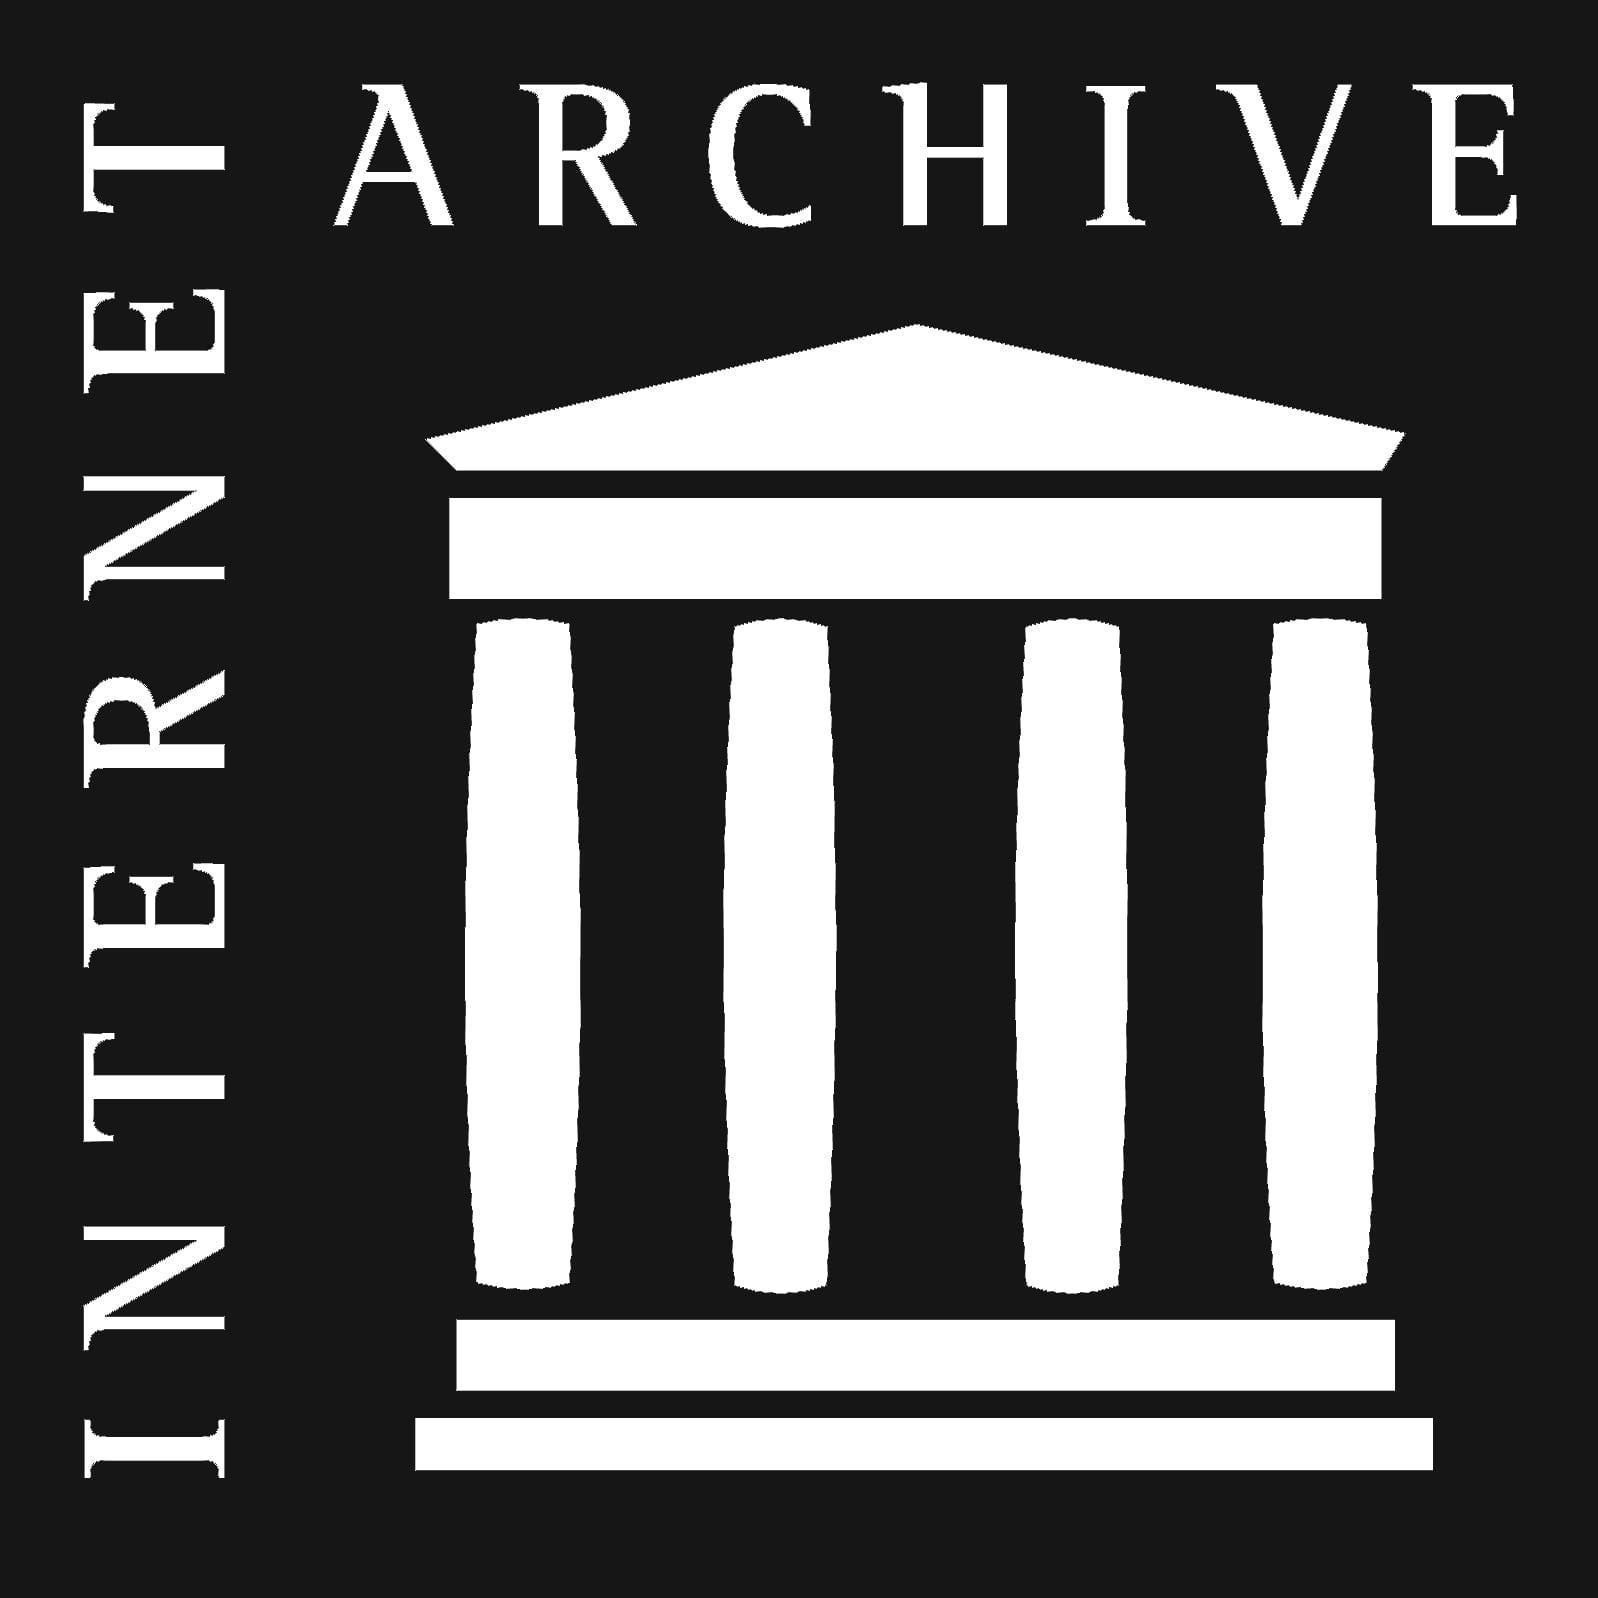 How to Expand Your Research Materials with Internet Archive